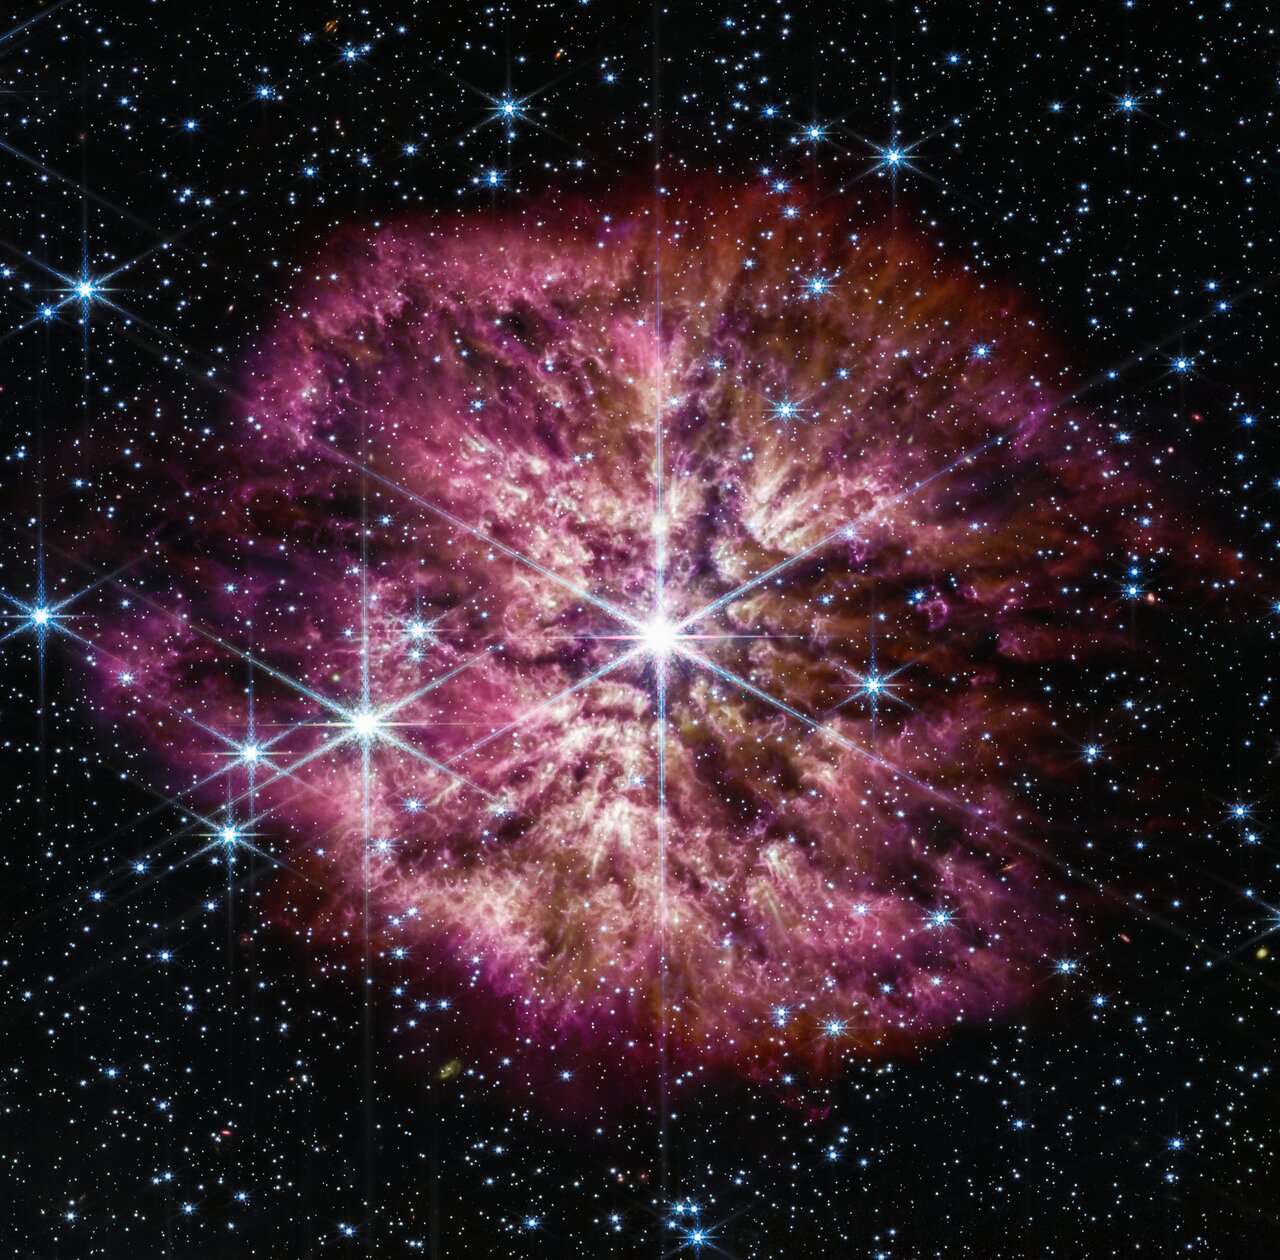 A large, bright star shines from the center with smaller stars scattered throughout the image. A clumpy cloud of material surrounds the central star, with more material above and below than on the sides, in some places allowing background stars to peek through. The cloud material is yellow closer to the star. Credit: NASA, ESA, CSA, STScI, Webb ERO Production Team